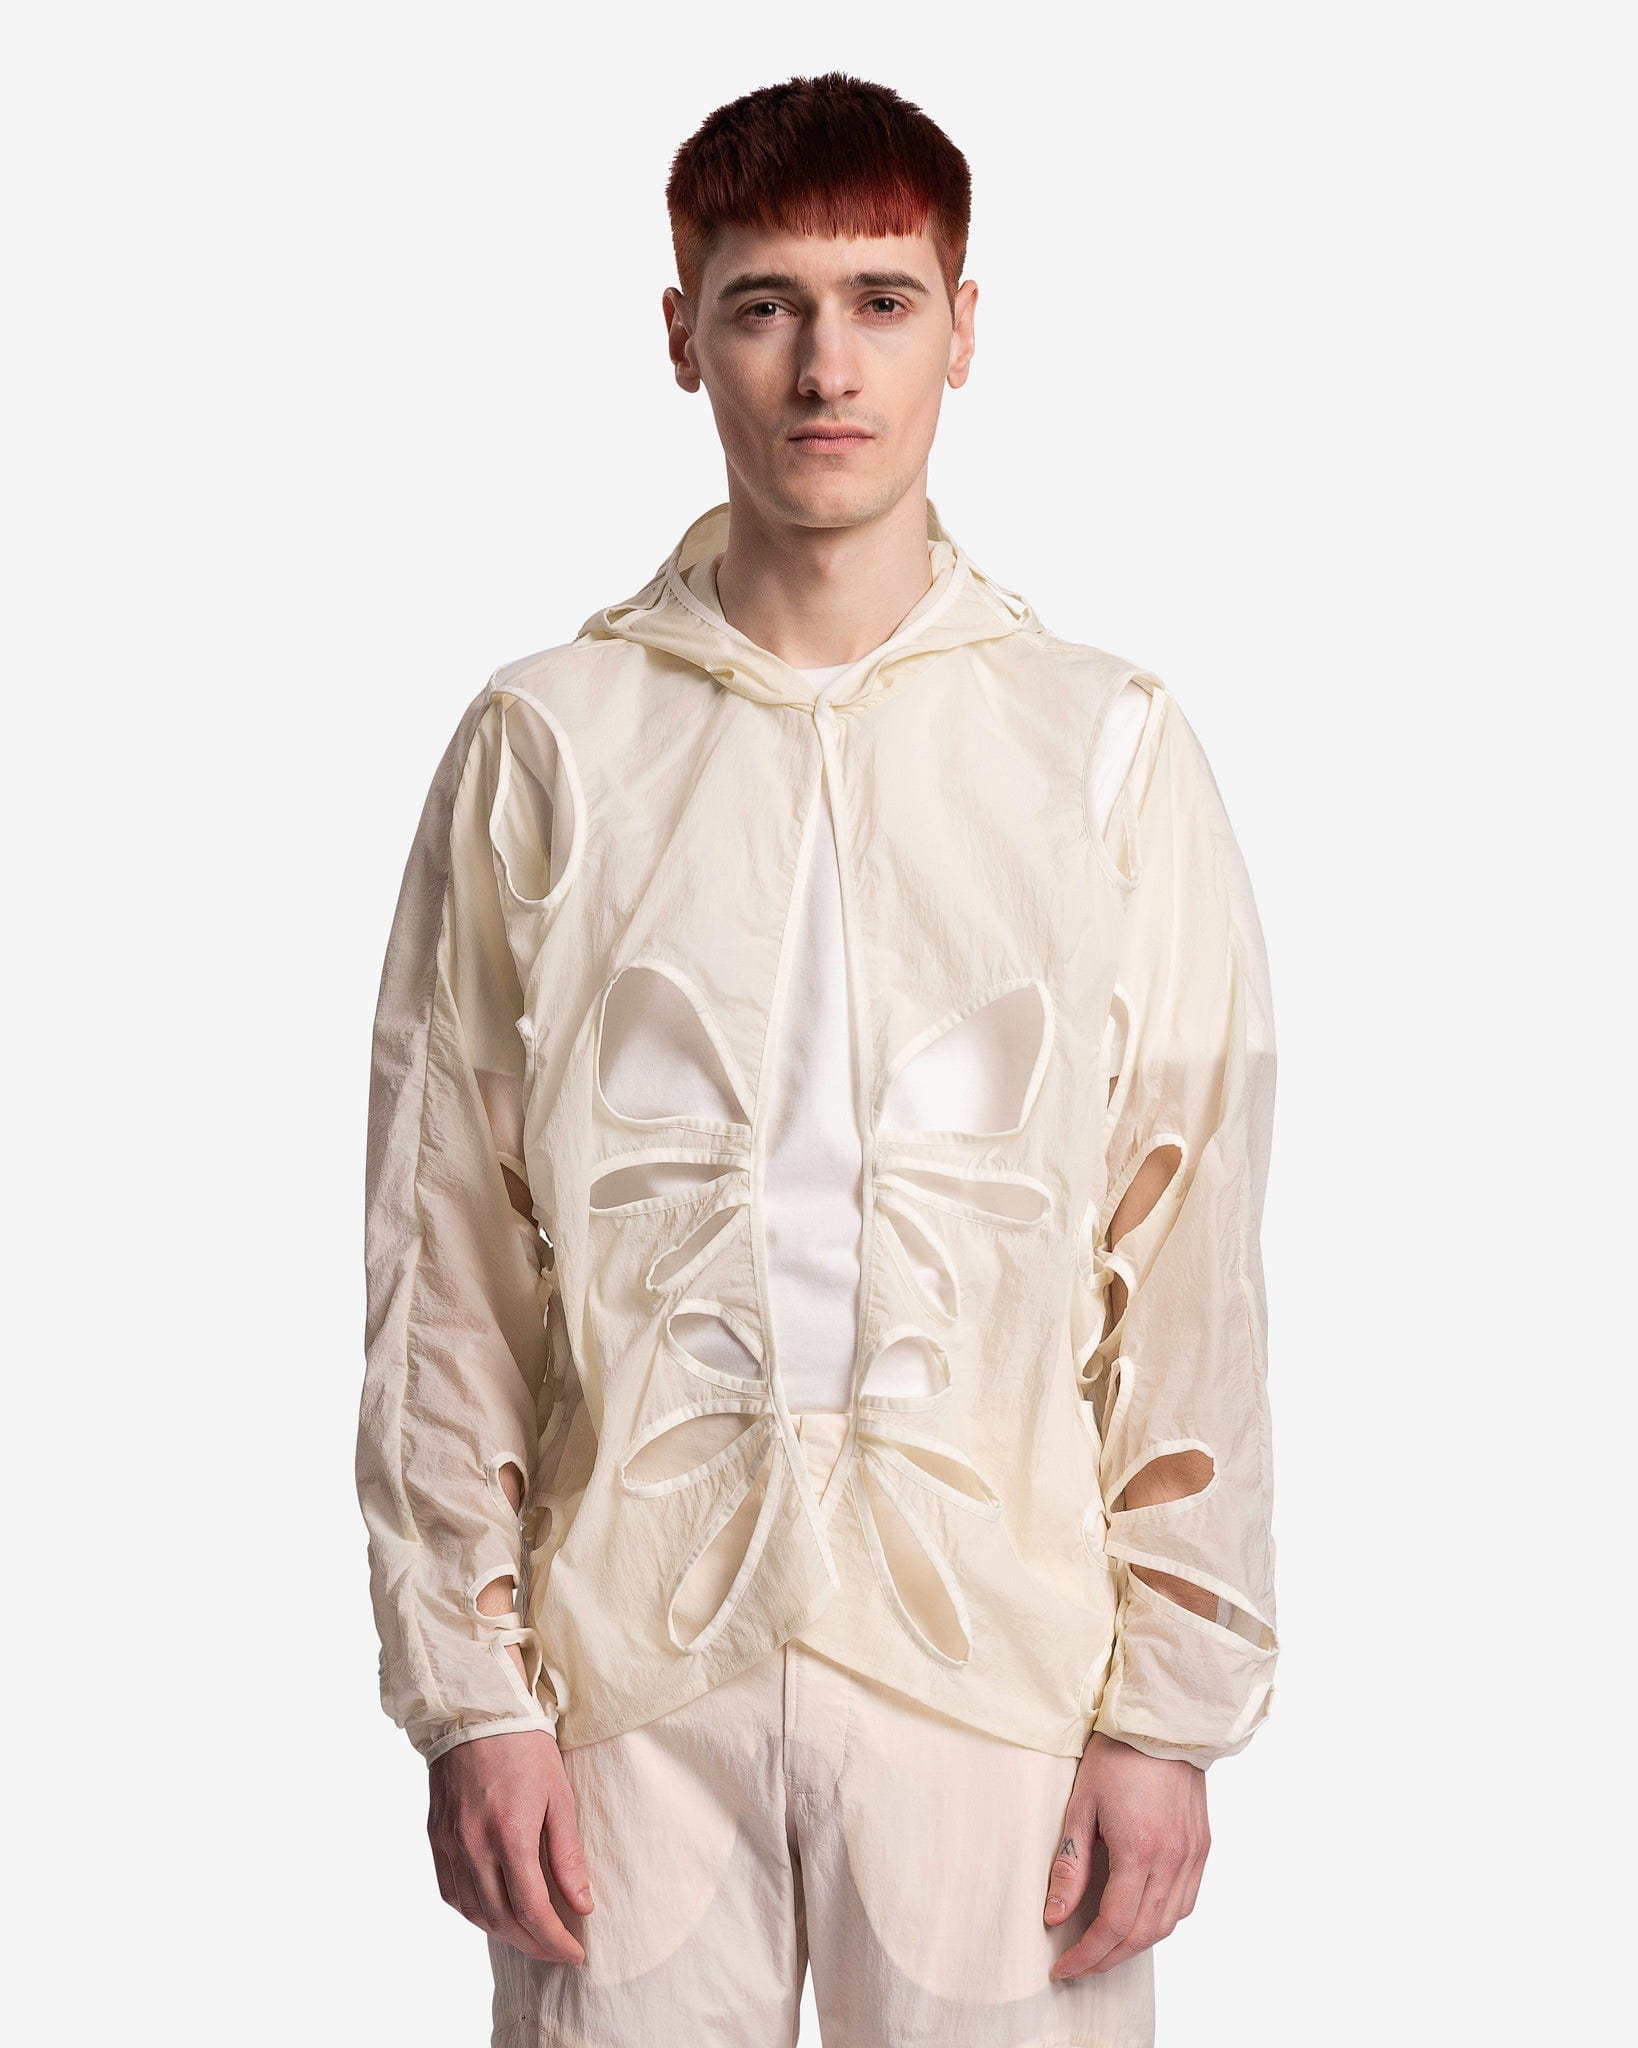 POST ARCHIVE FACTION (P.A.F) Men's Jackets 5.0+ Technical Jacket Left in Ivory